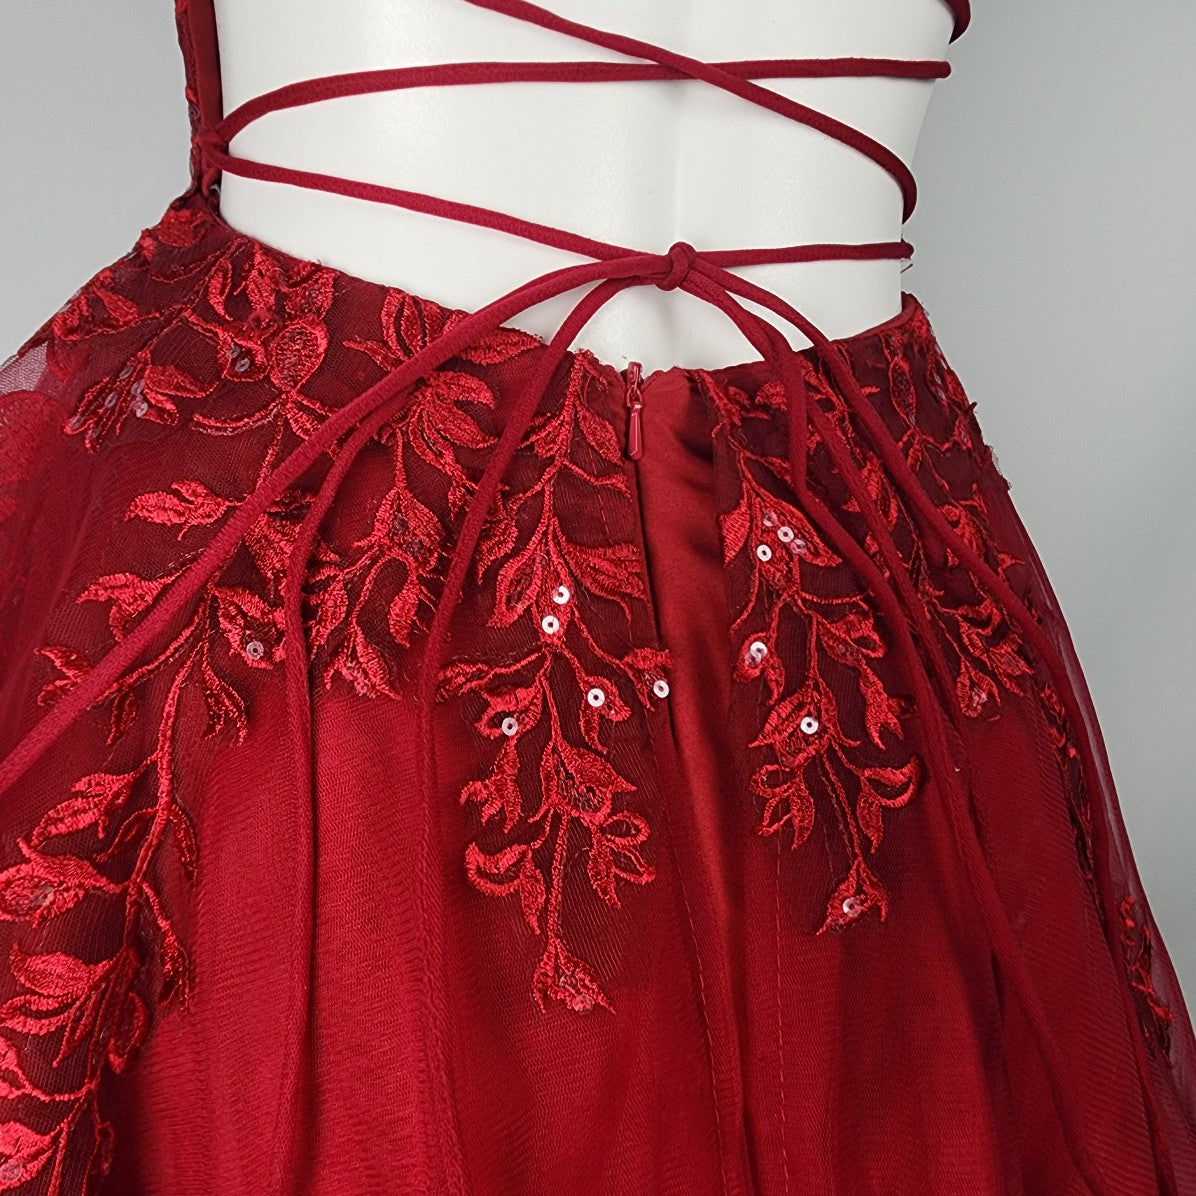 JJ's House Red Lace Tule Skirt Bridesmaid Party Dress Size 2